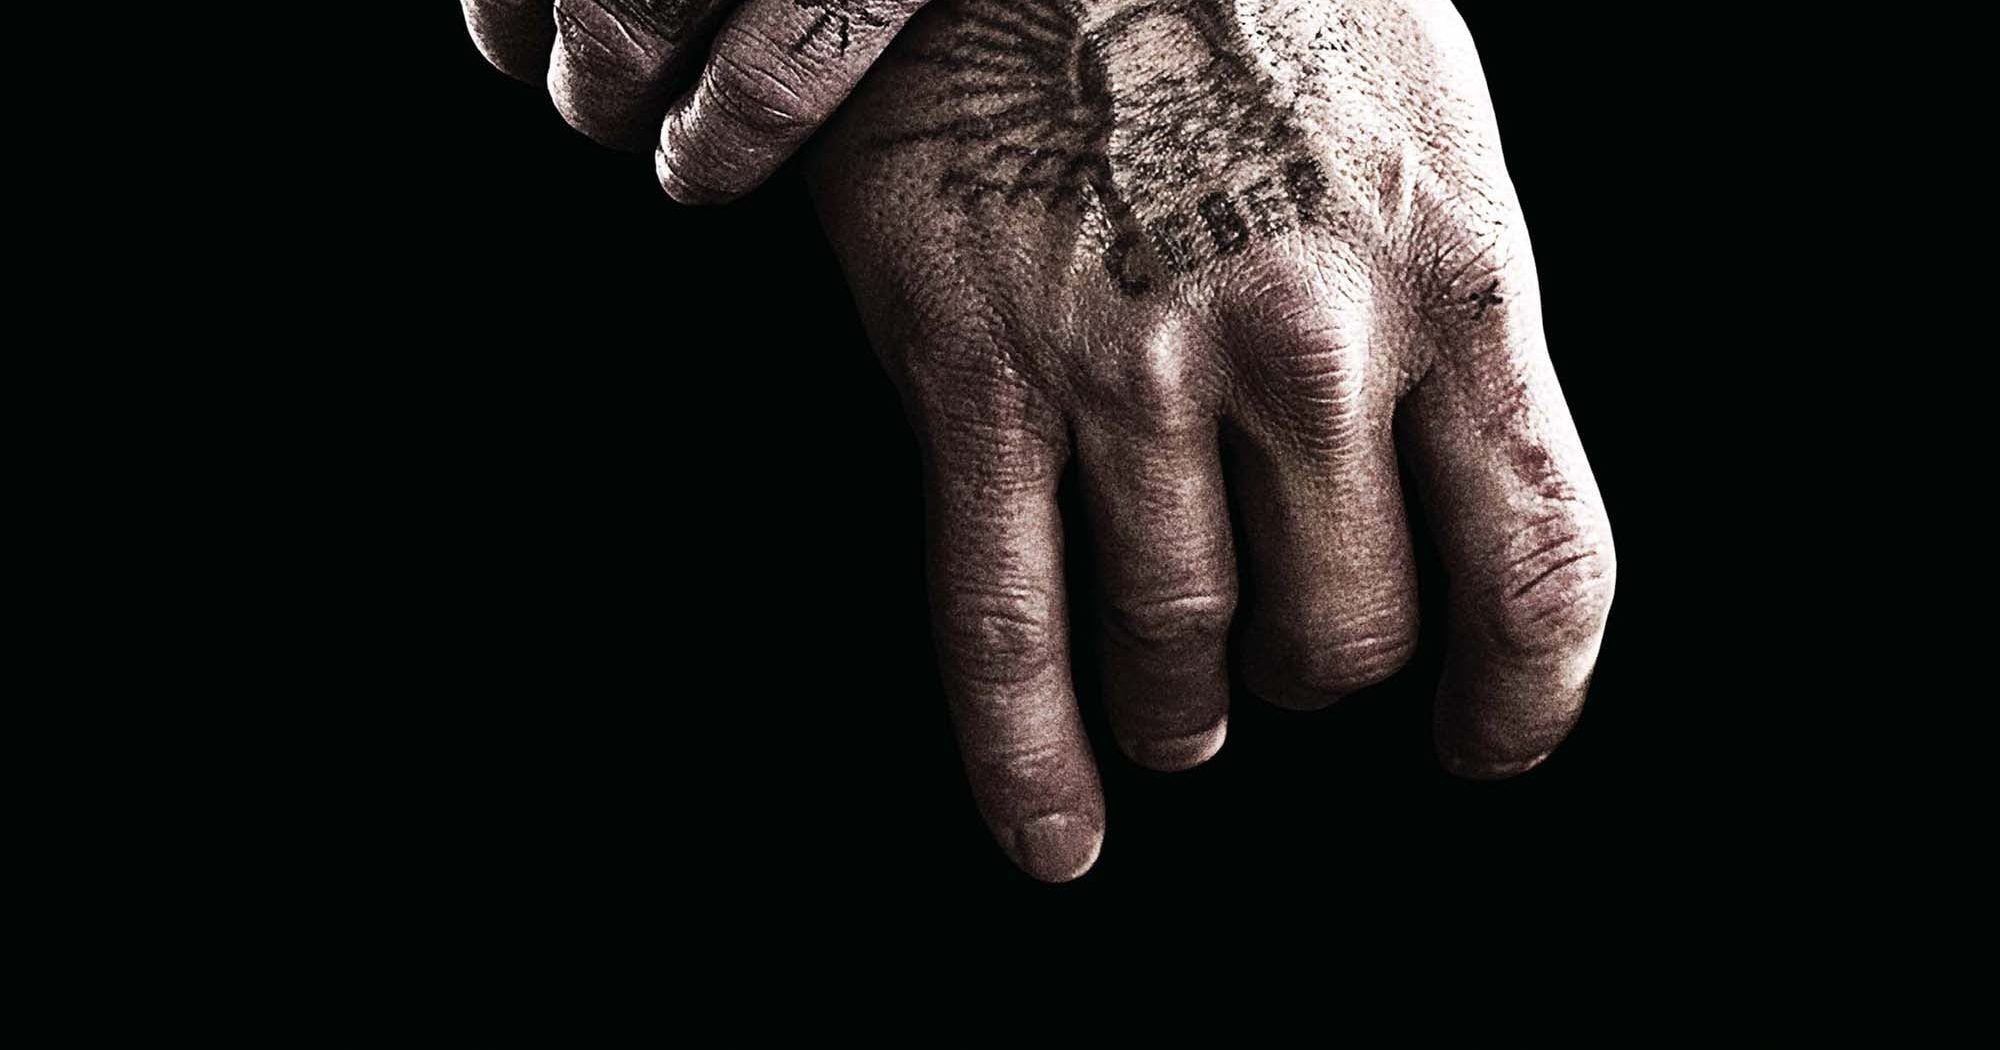 Poster for the movie "Eastern Promises"